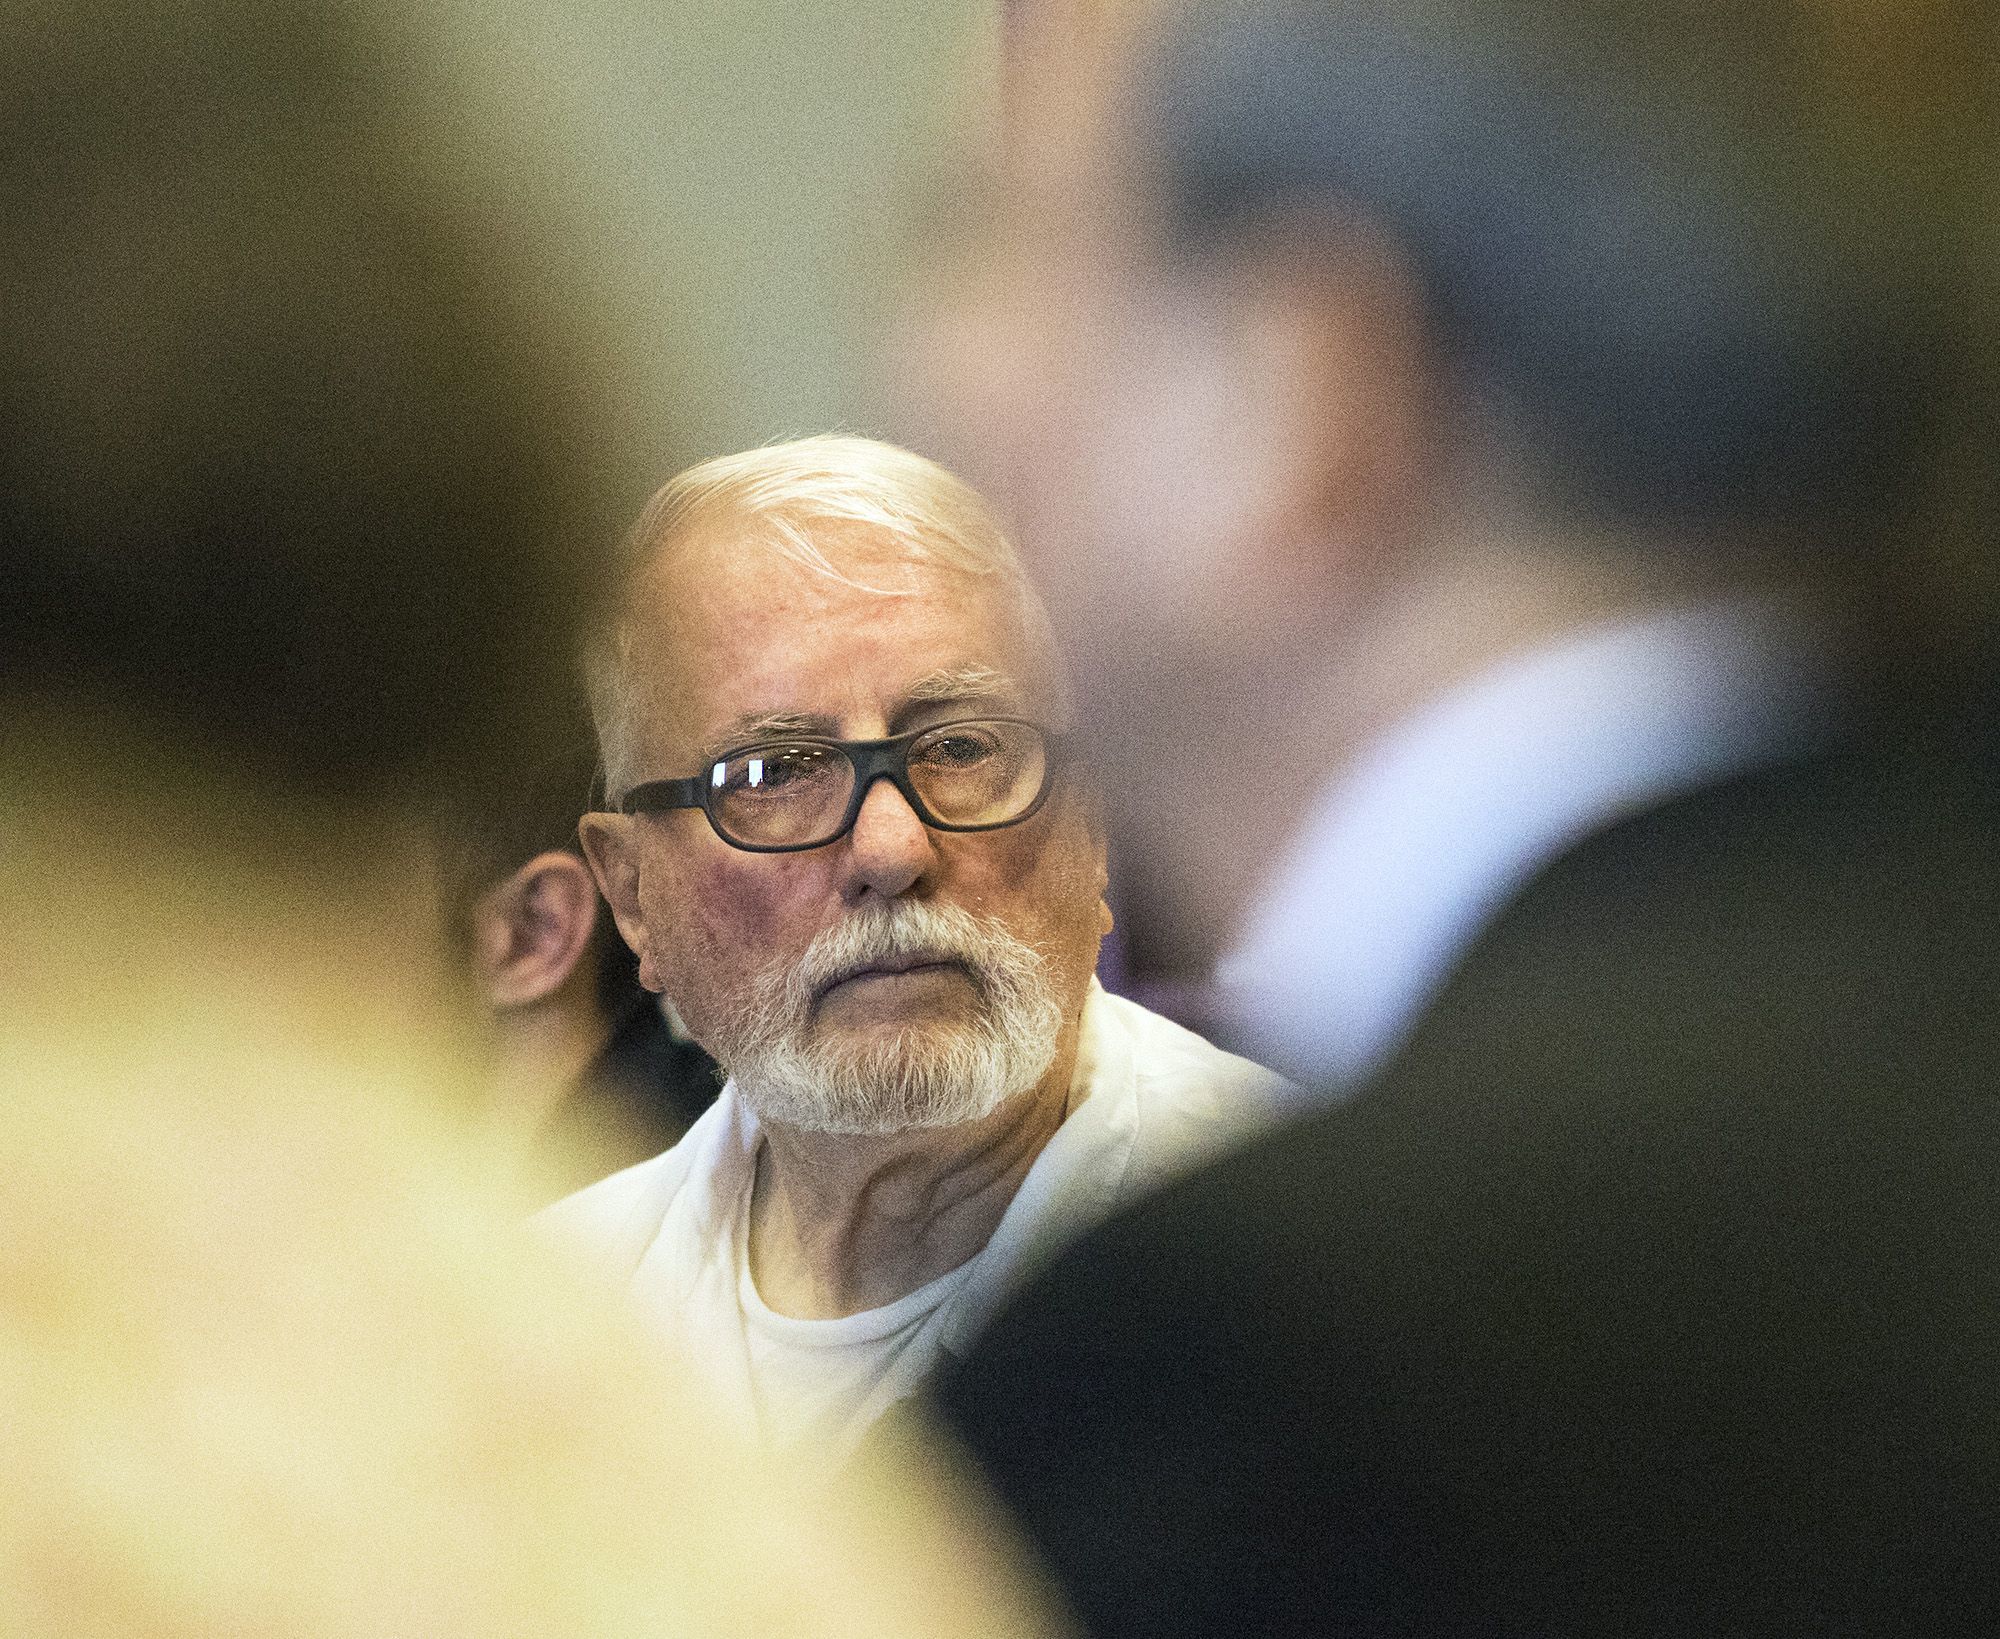 Jack McCullough looks to the back of the DeKalb County courtroom between Maria Ridulph’s sister Pat Quinn (left) and brother Charles Ridulph (right) during a hearing in the DeKalb County Courthouse on Fridayin Sycamore, Illinois.